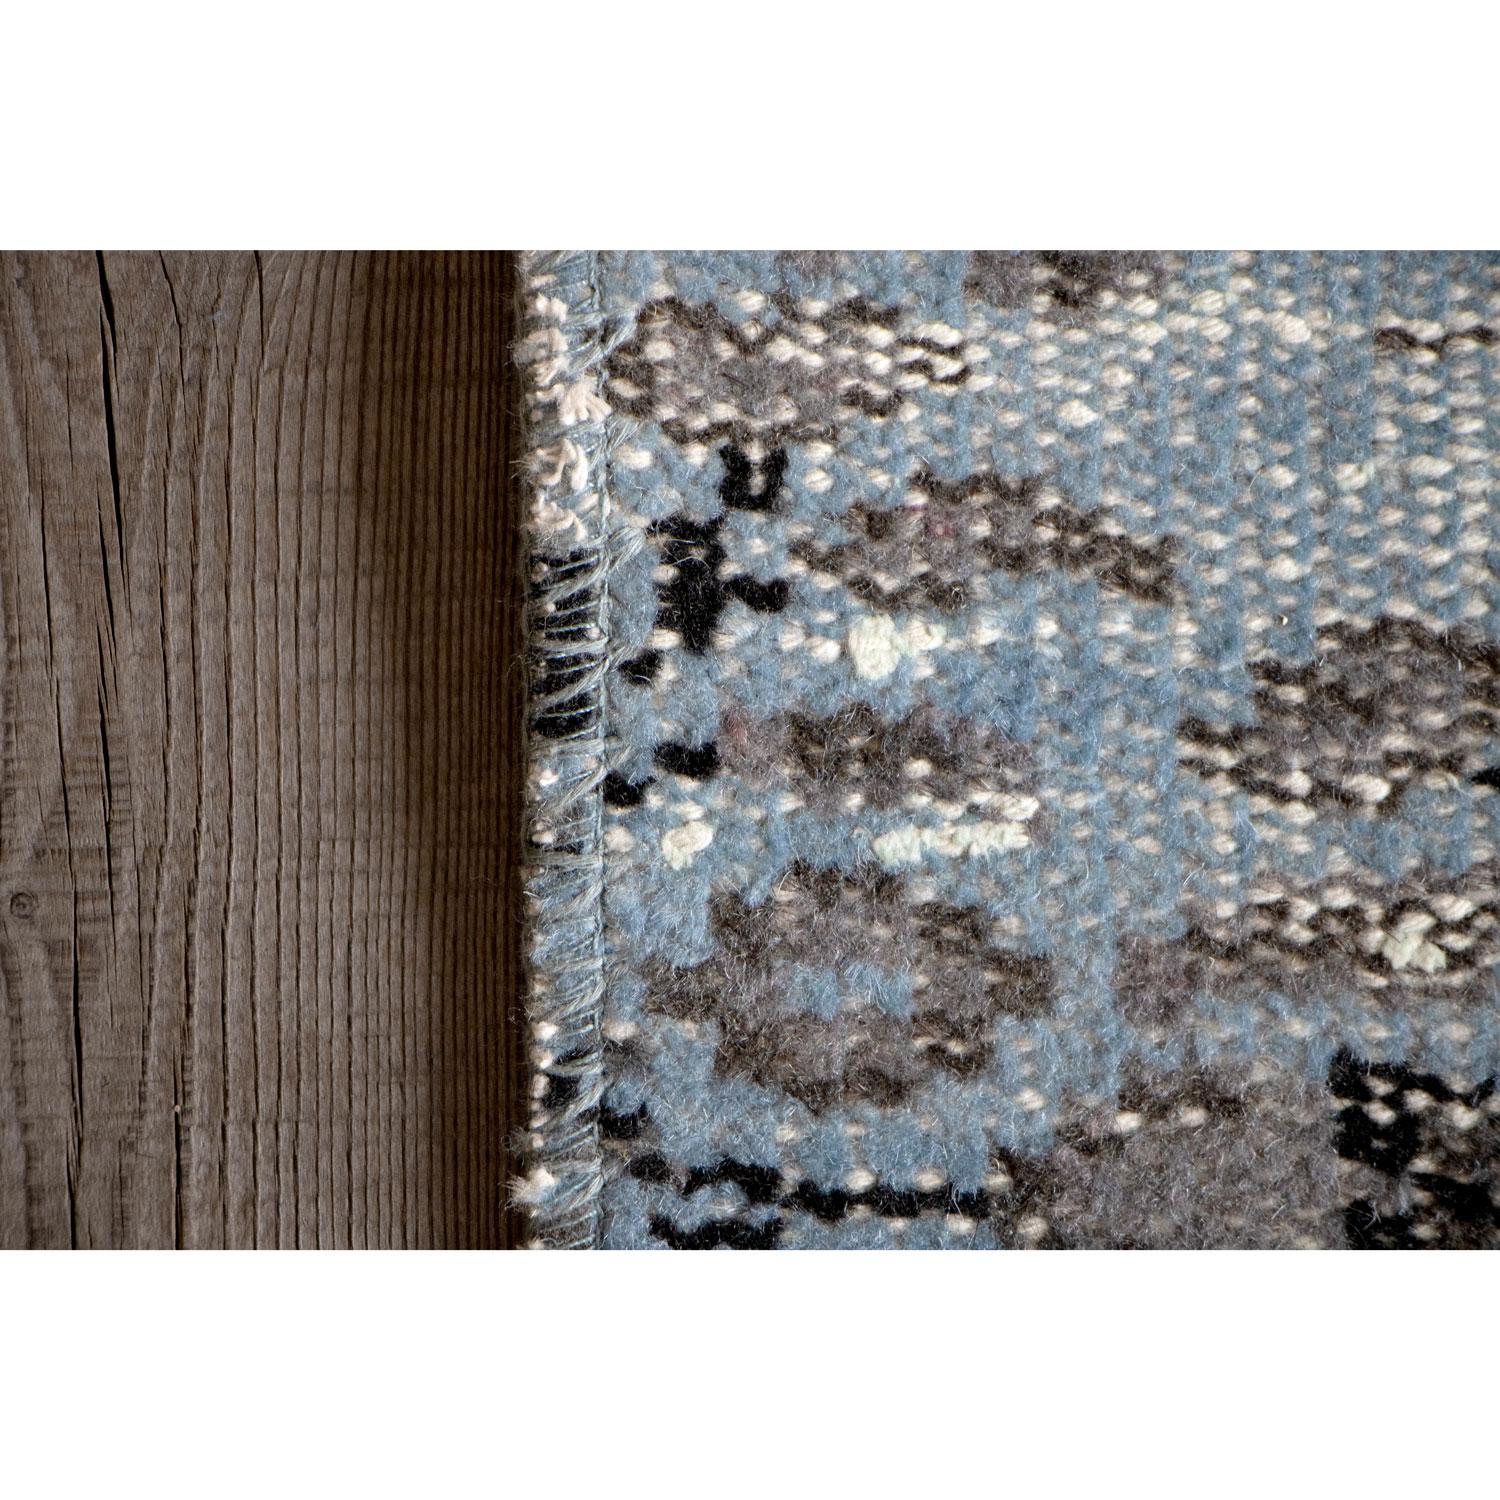 Antique Chic Vintage Blue Brown Wool Cotton Rug by Deanna Comellini 250x350 cm For Sale 7